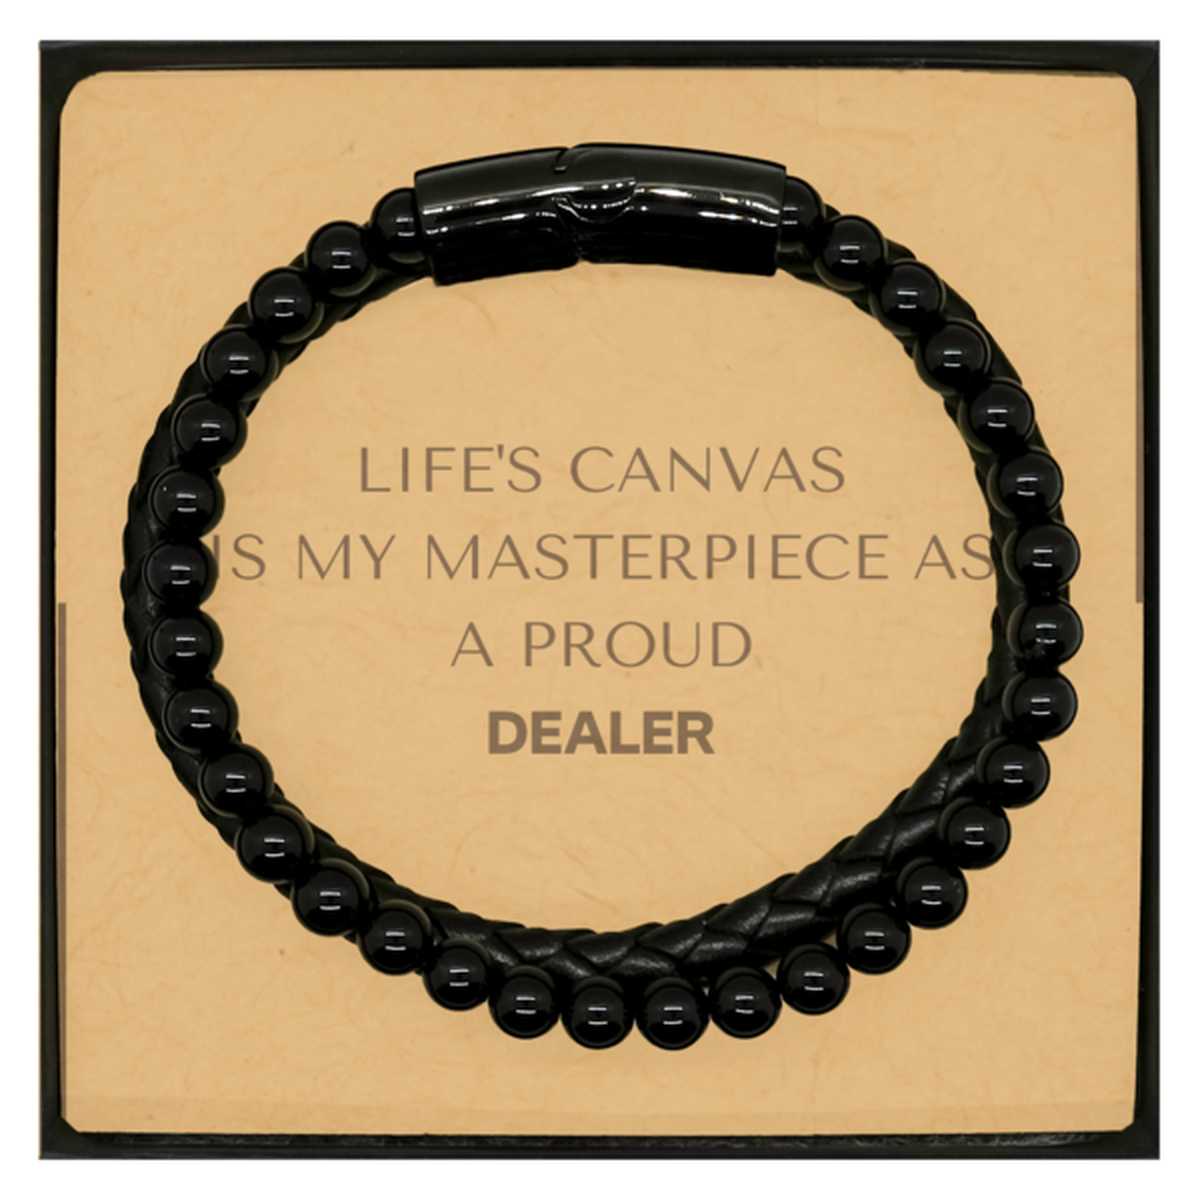 Proud Dealer Gifts, Life's canvas is my masterpiece, Epic Birthday Christmas Unique Stone Leather Bracelets For Dealer, Coworkers, Men, Women, Friends